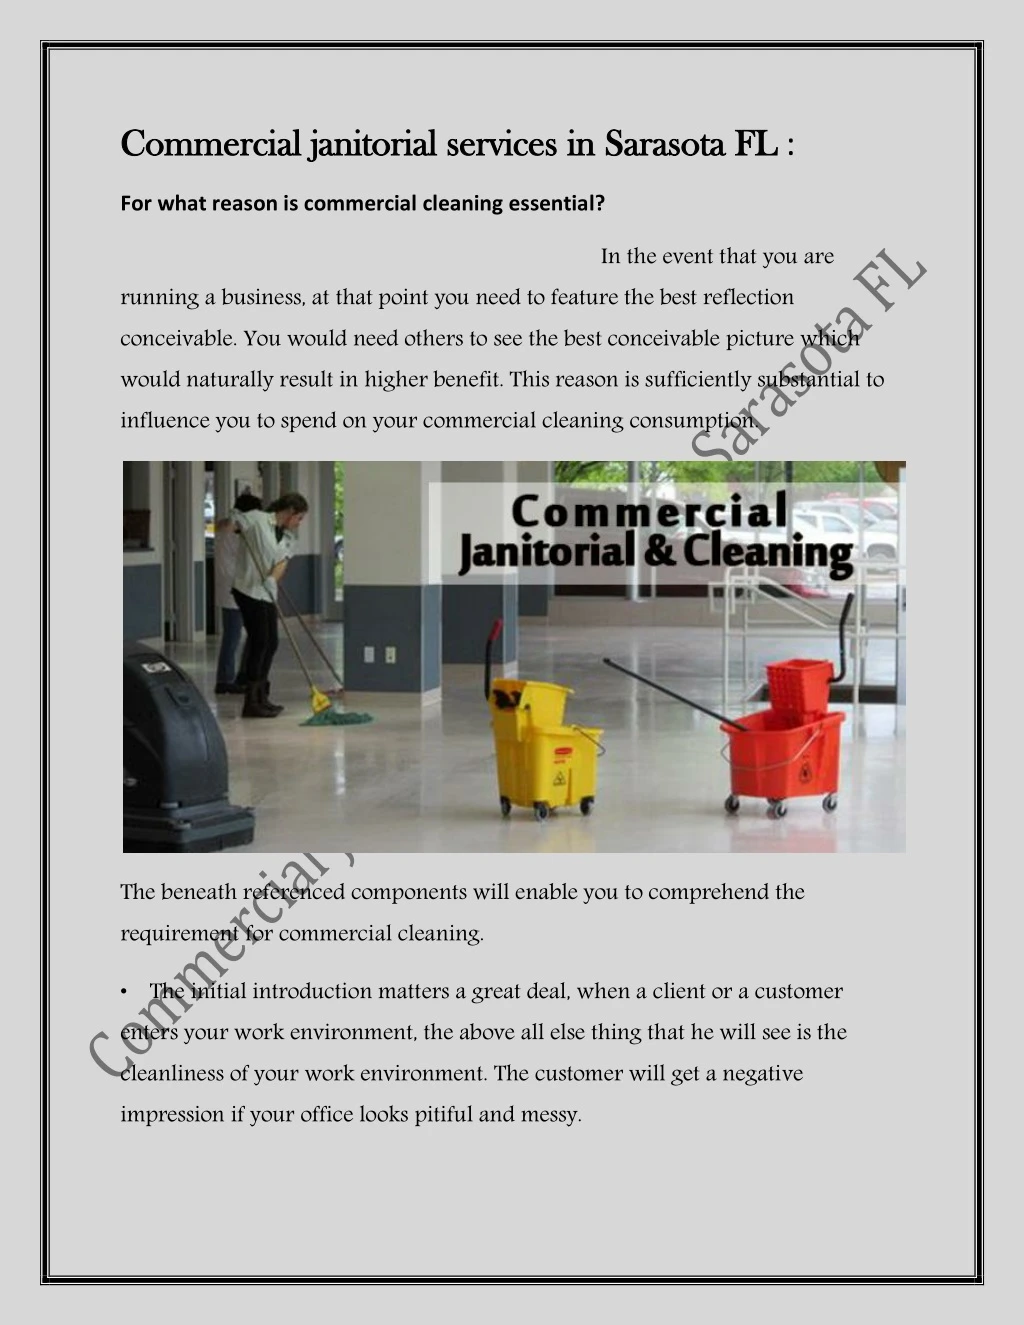 commercial janitorial services in sarasota